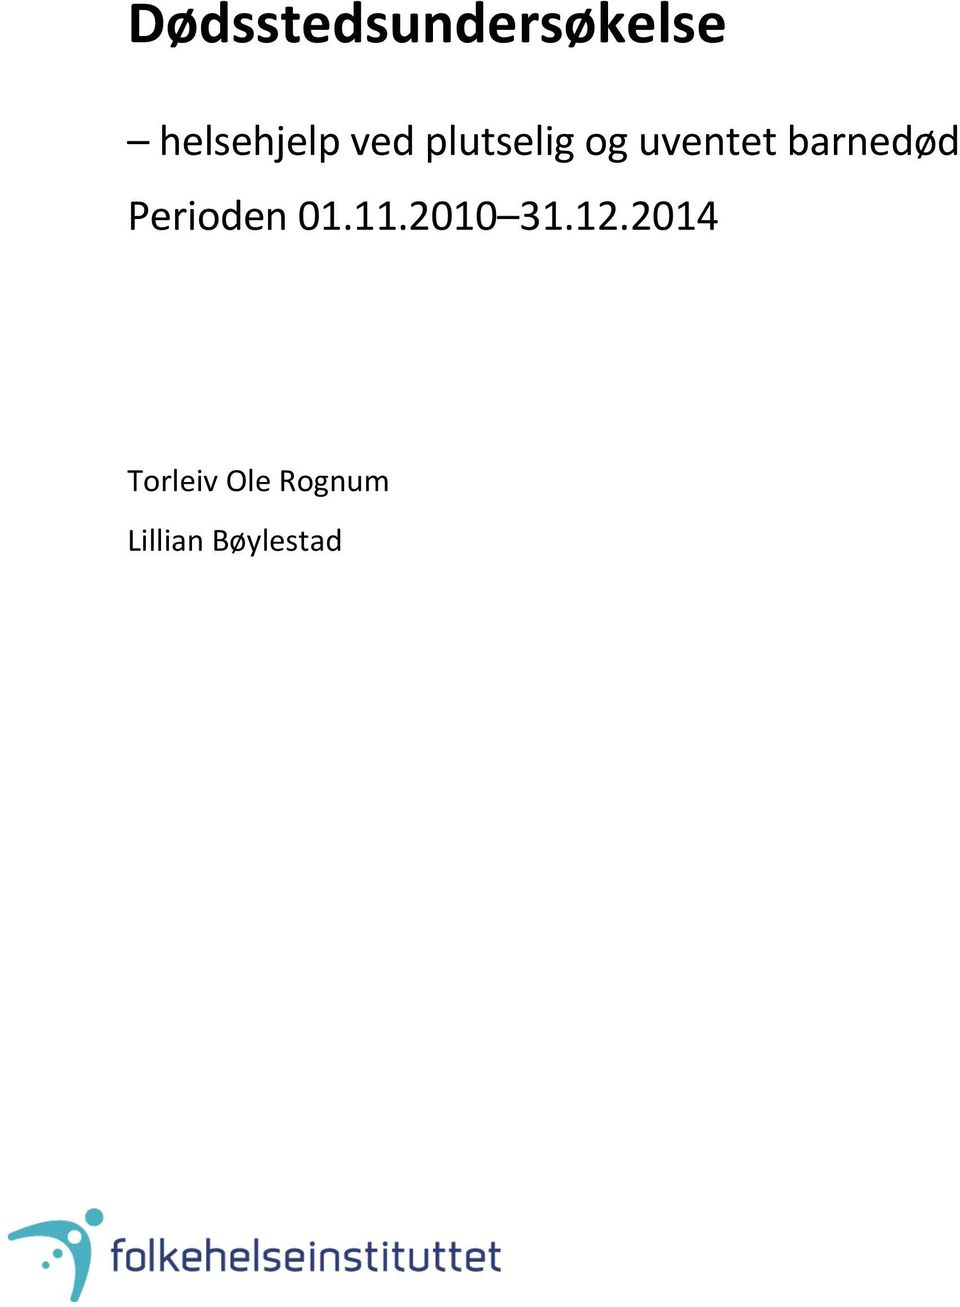 Perioden 01.11.2010 31.12.